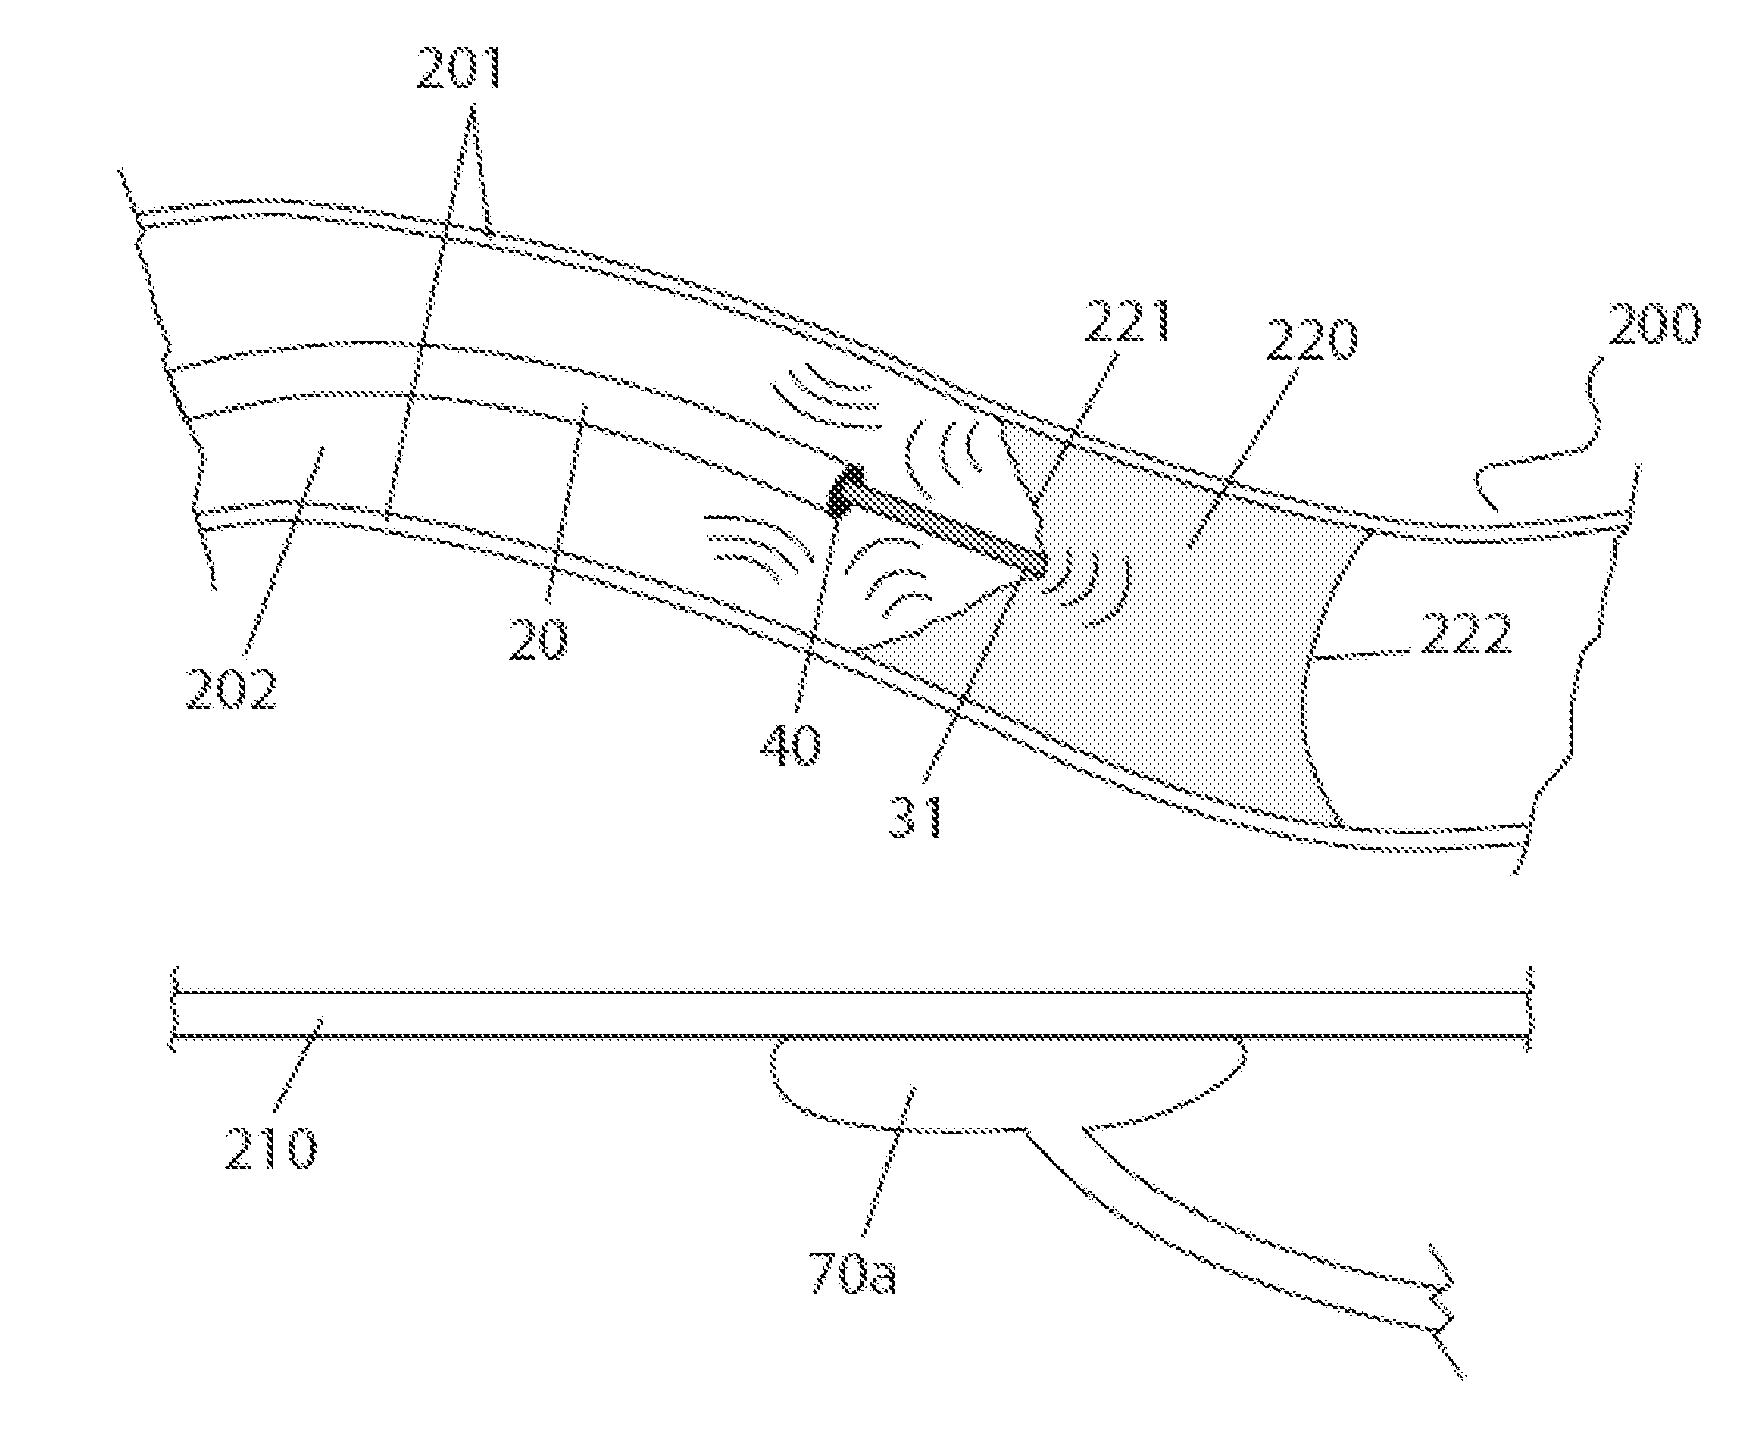 Apparatus and Method for Guided Chronic Total Occlusion Penetration